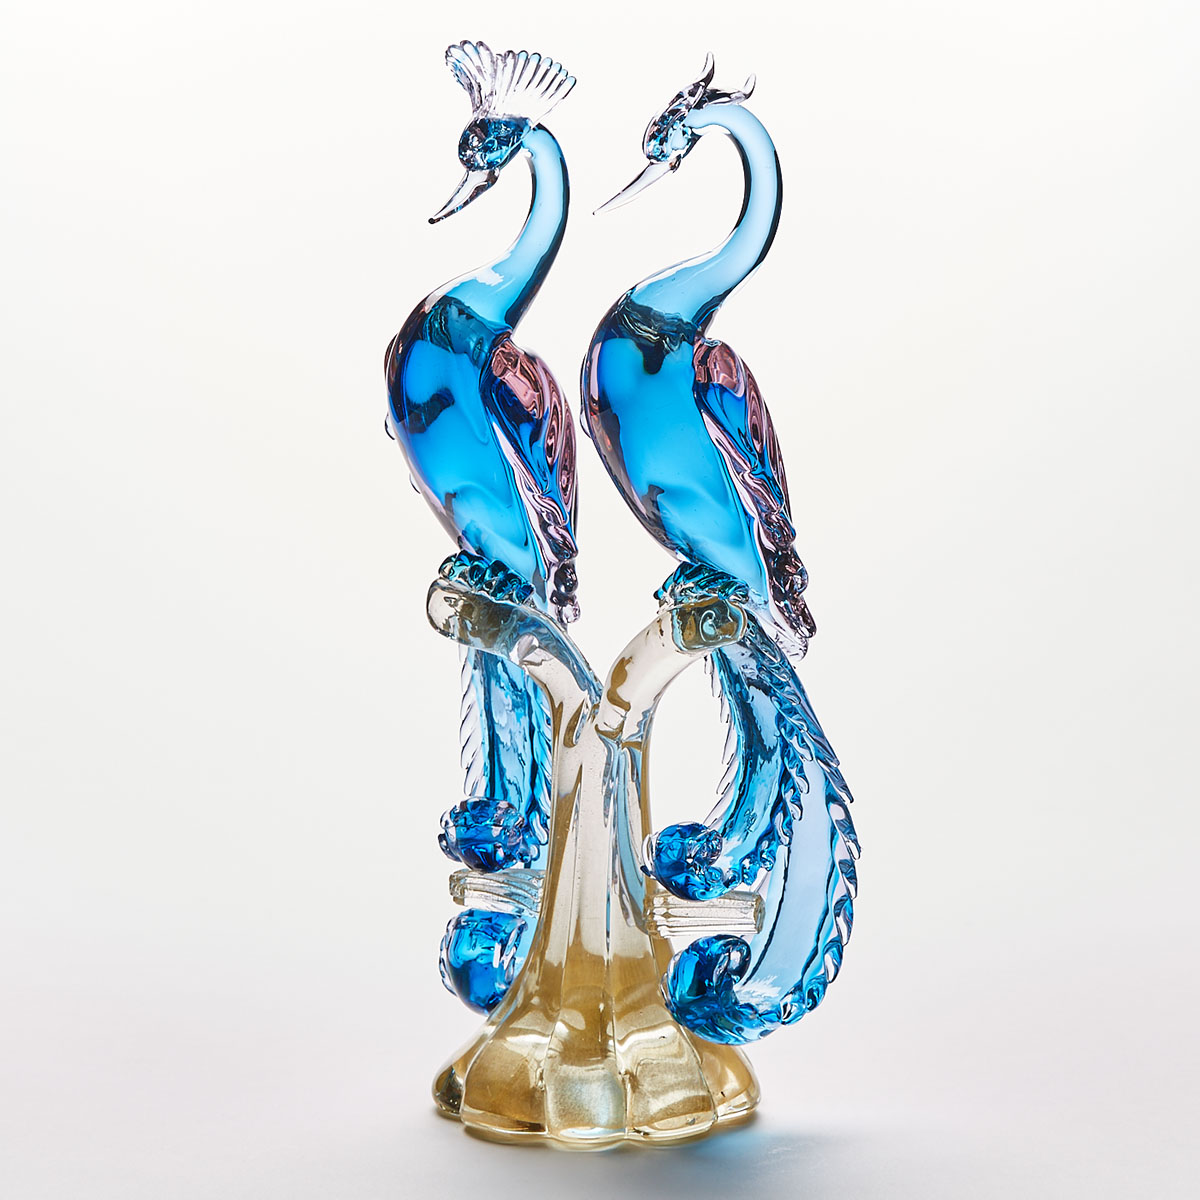 Murano Glass Group of Two Blue Peacocks, probably Seguso, mid-20th century